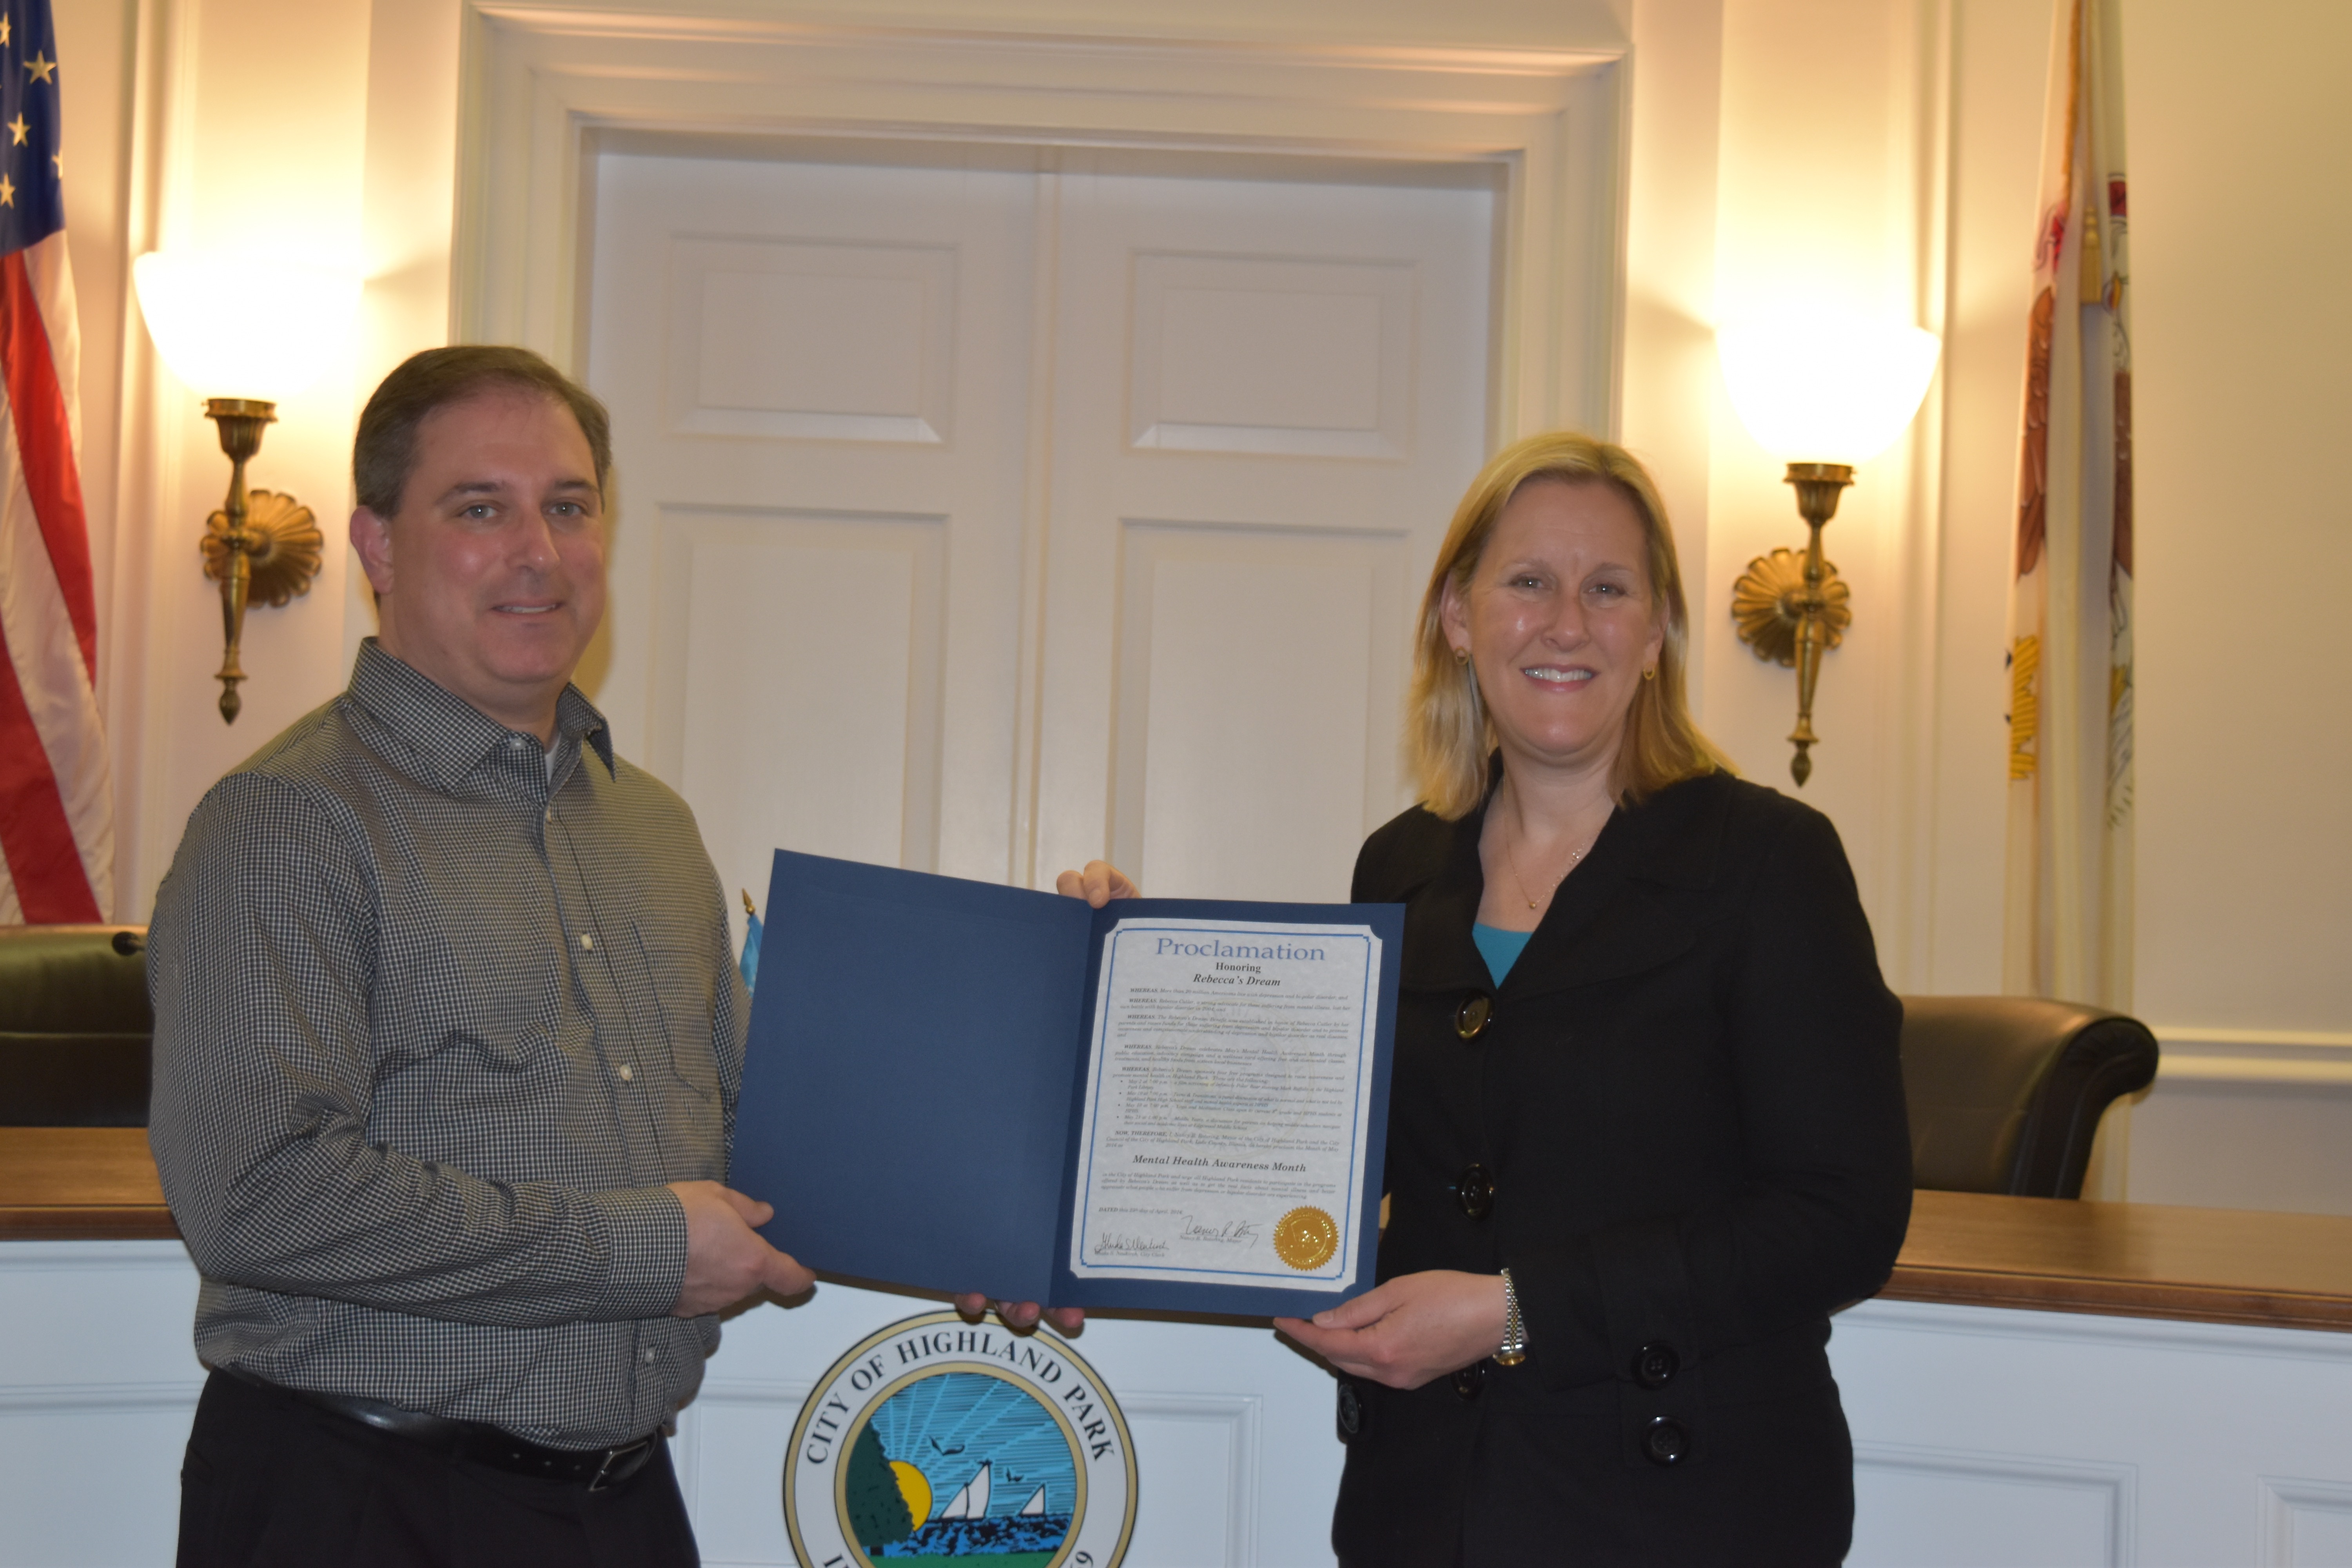 Brett Cutler accepting a Proclamation from Mayor Nancy R. Rotering, Mayor of Highland Park